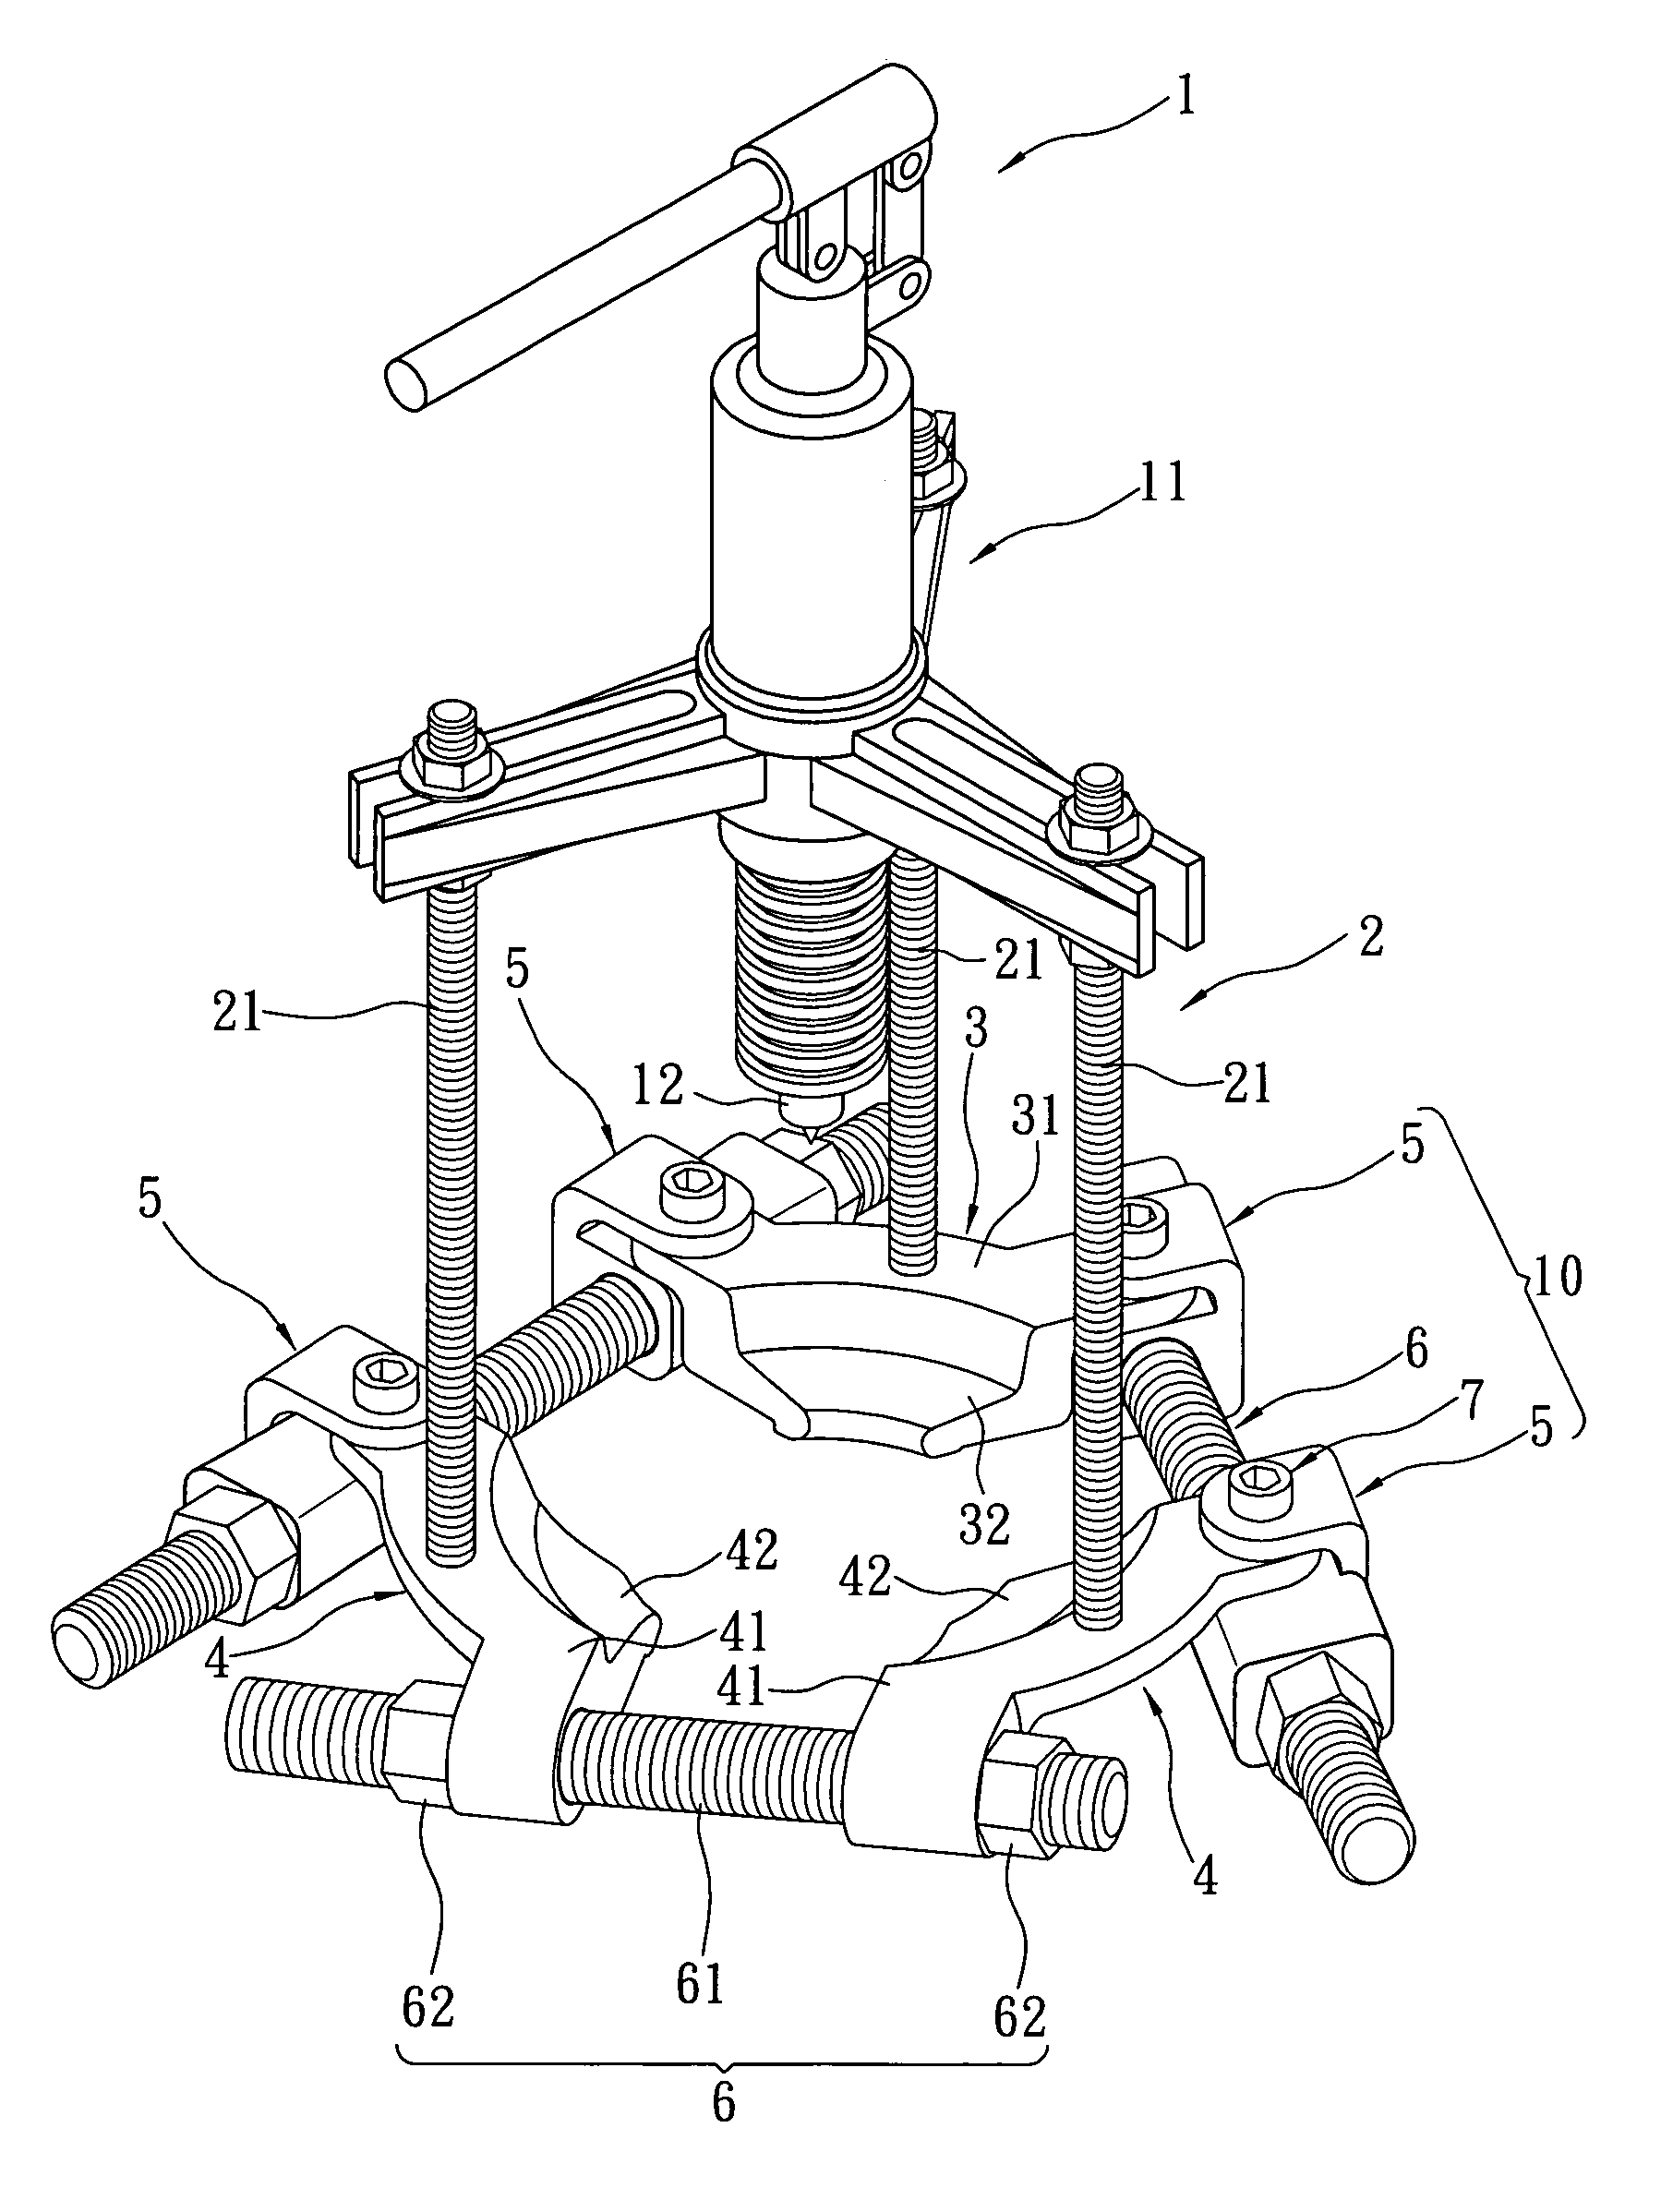 Clamping apparatus of a puller